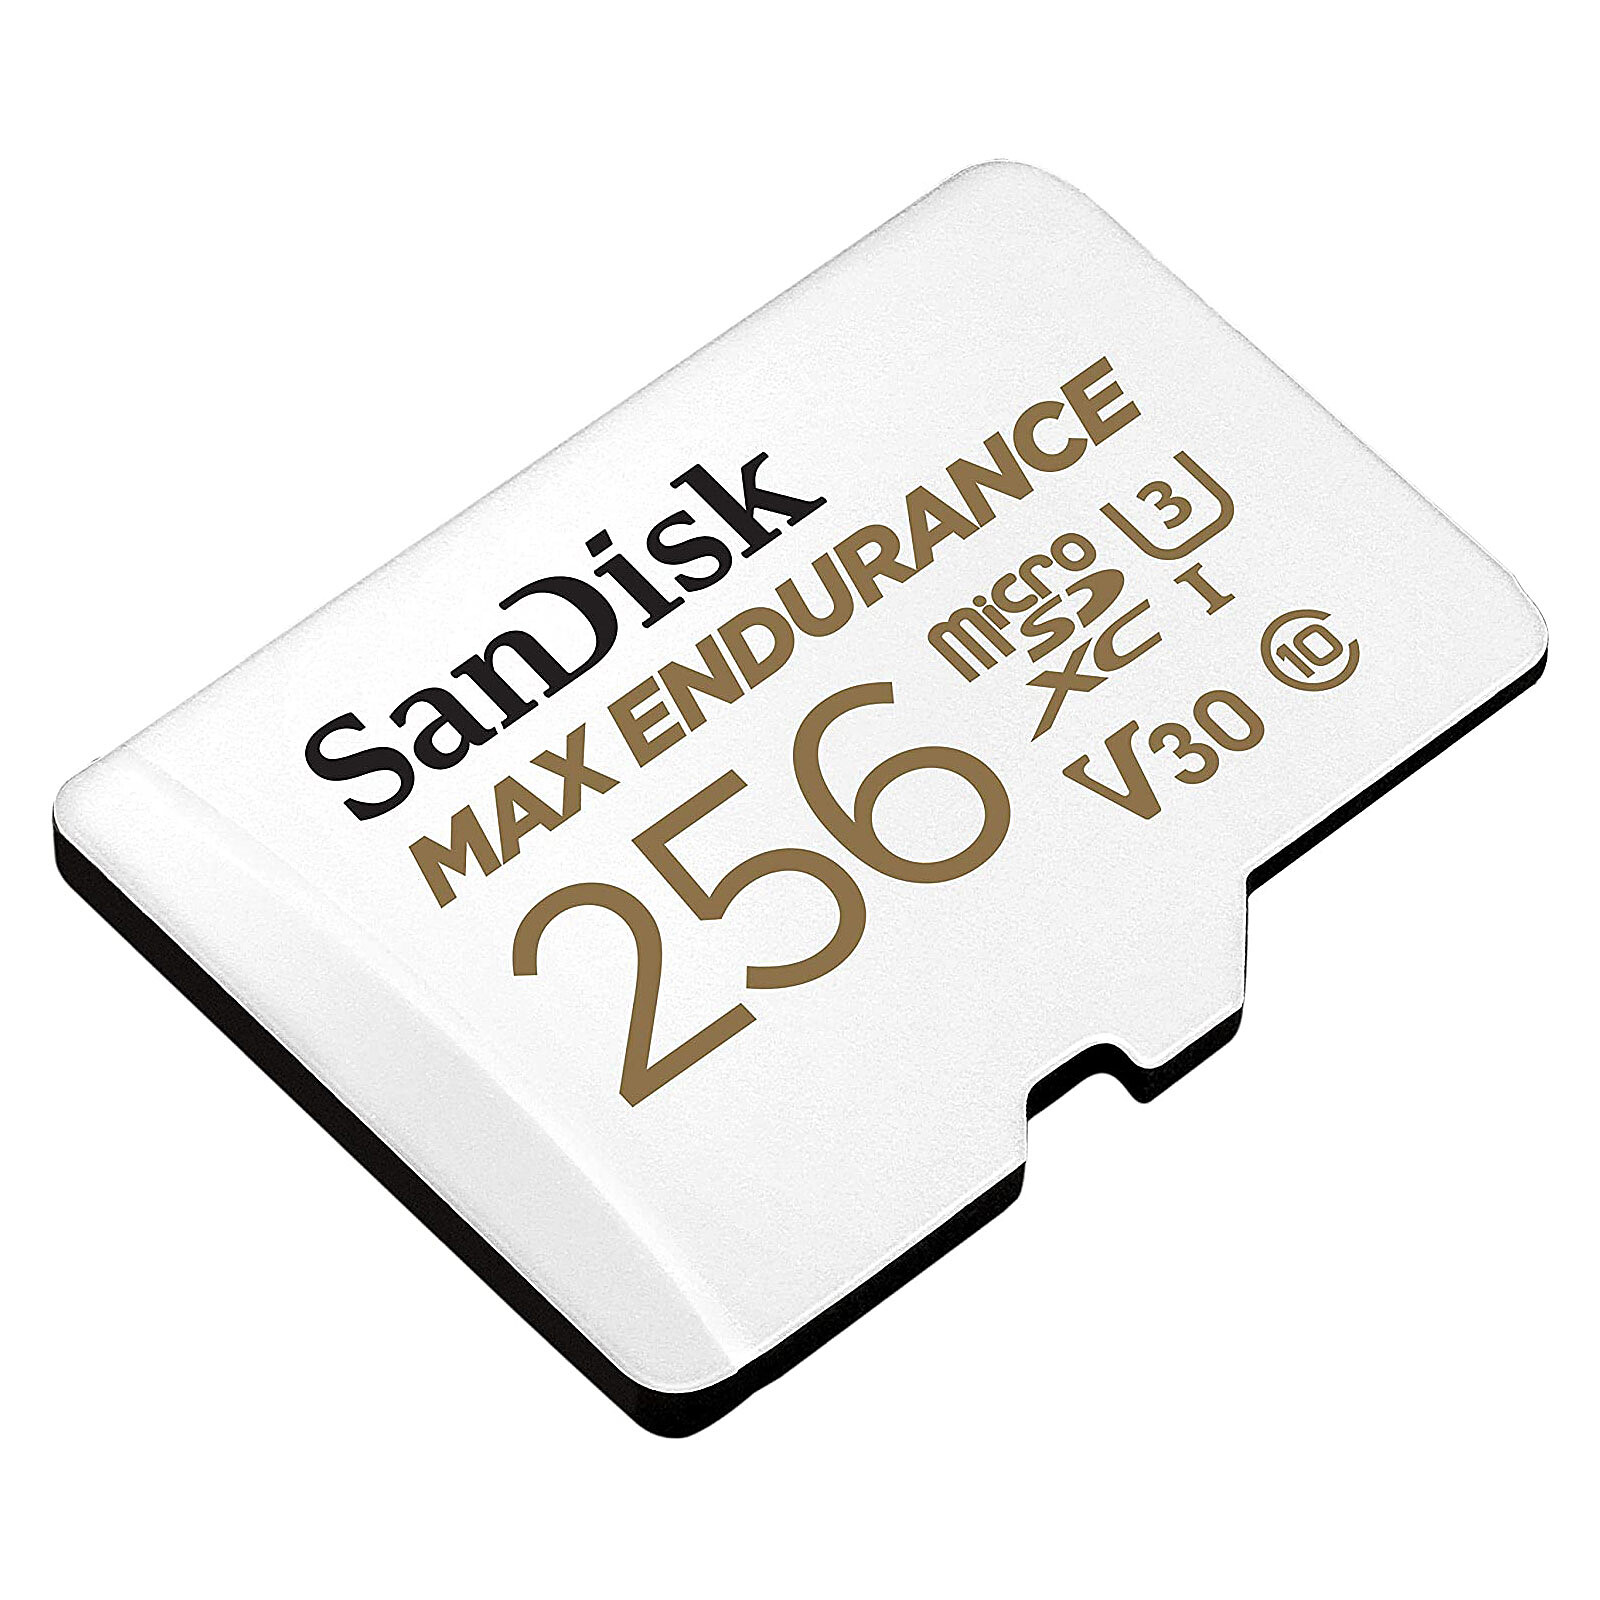 SanDisk Extreme Pro CompactFlash 32GB Memory Card - Memory card - LDLC  3-year warranty